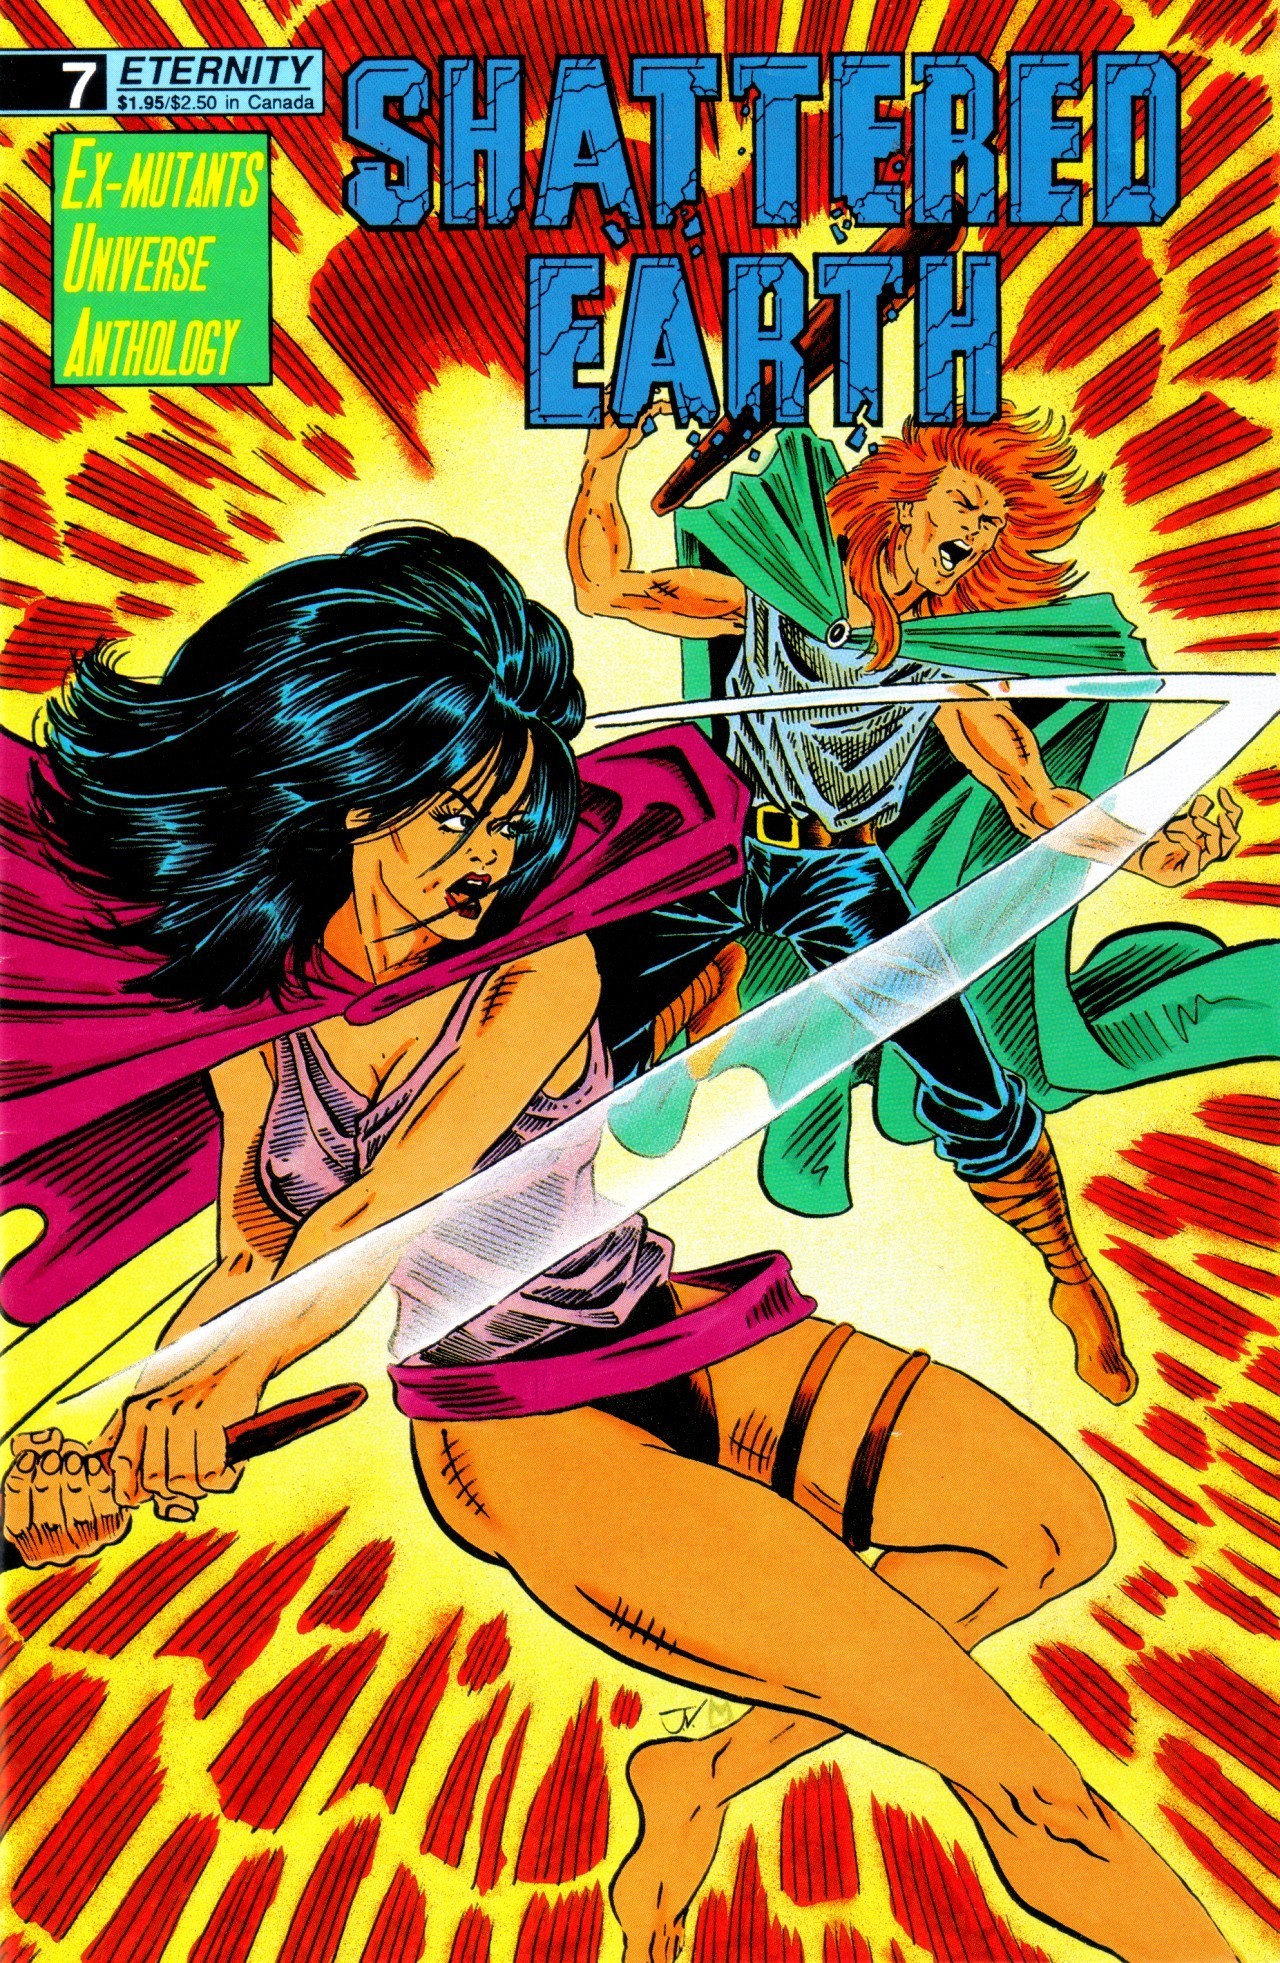 Read online Shattered Earth comic -  Issue #7 - 1